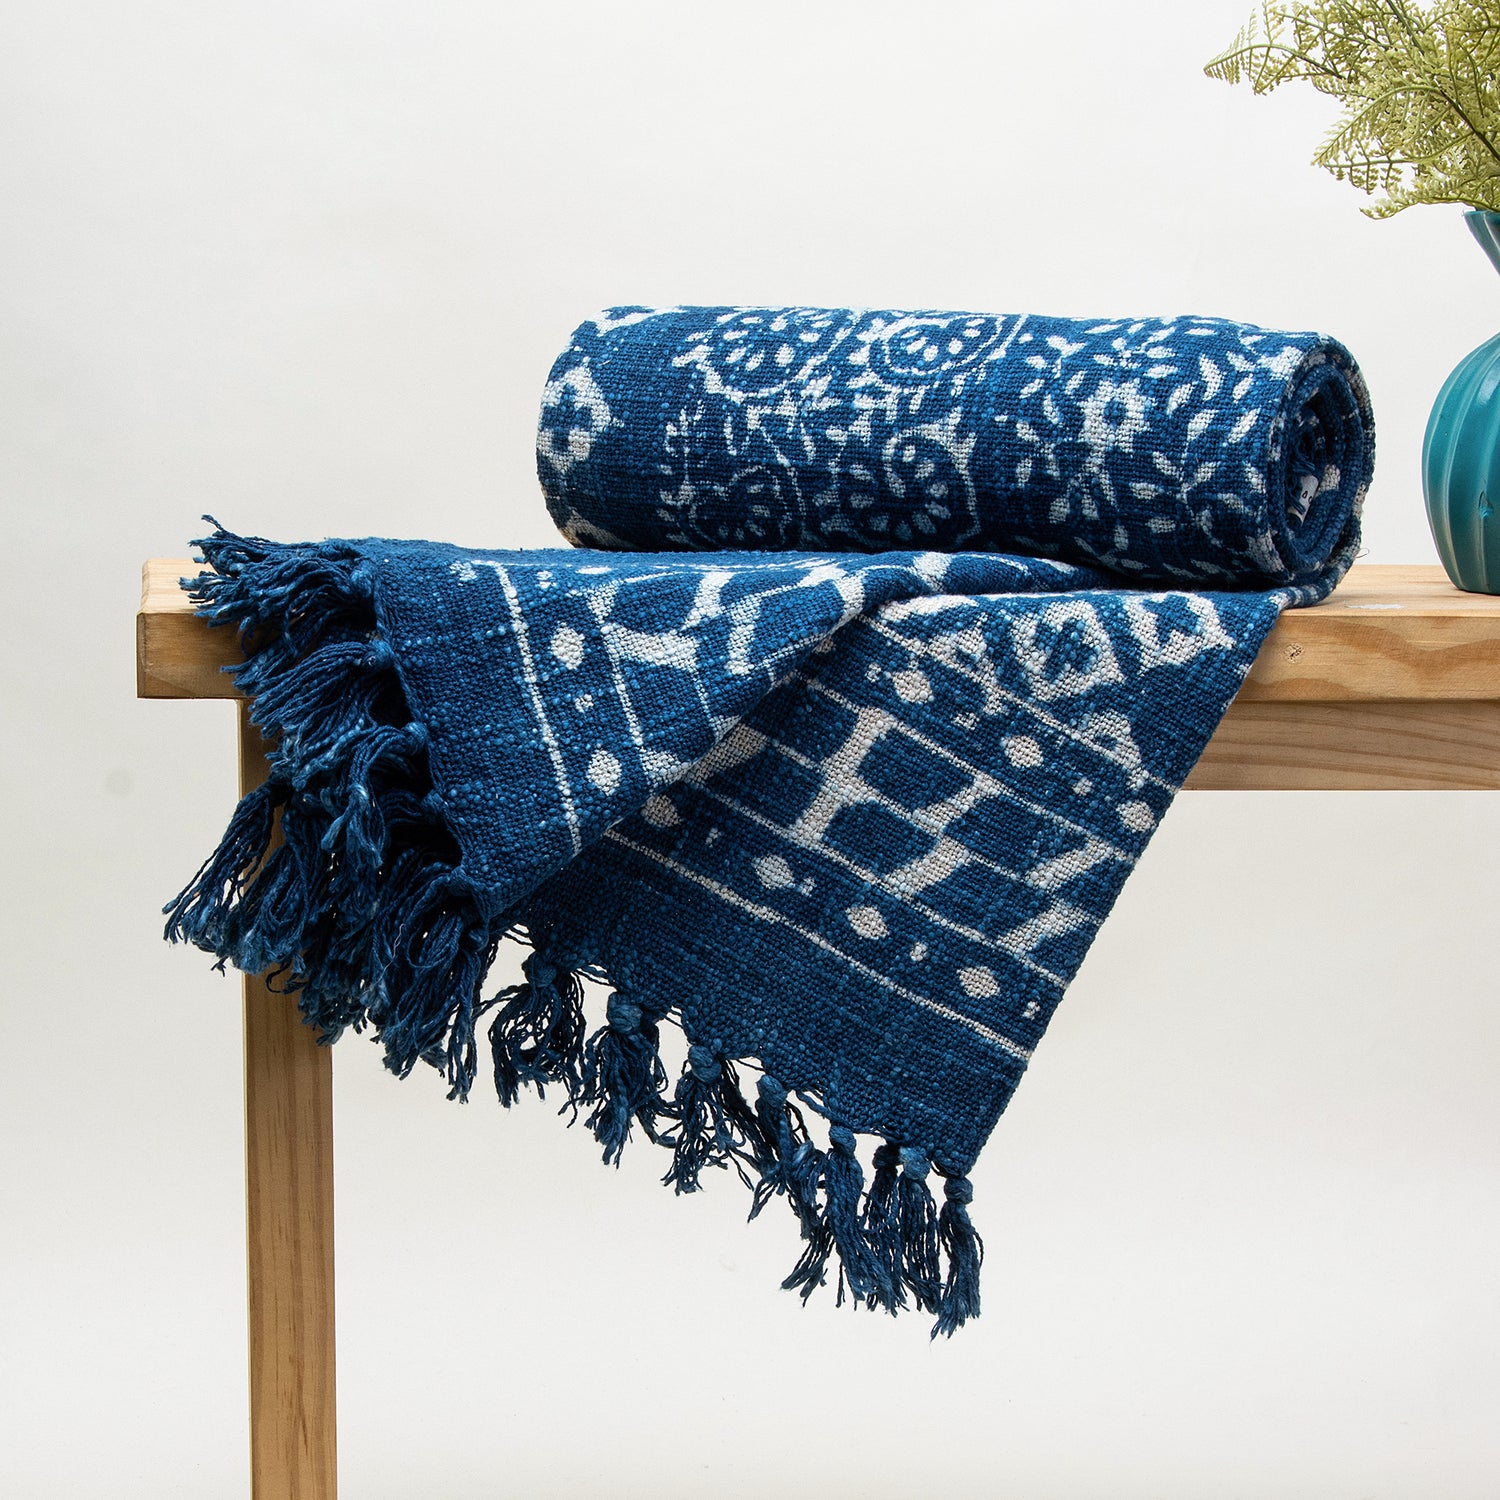 Living Room Couch Decor Blue Throw Blankets